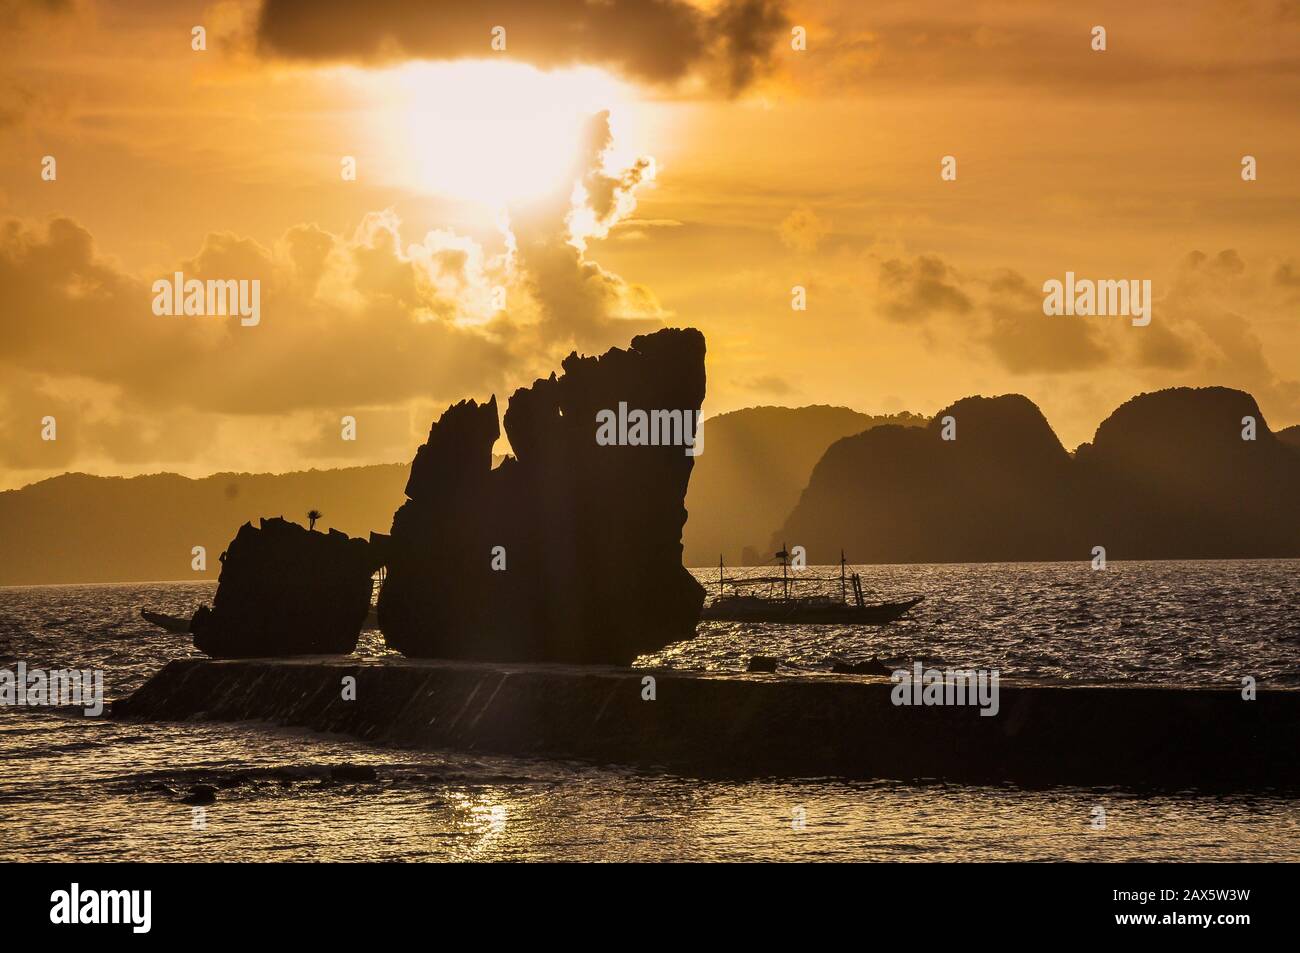 Late afternoon scenery - view from Lagen Island, El Nido, Palawan, Philippines Stock Photo